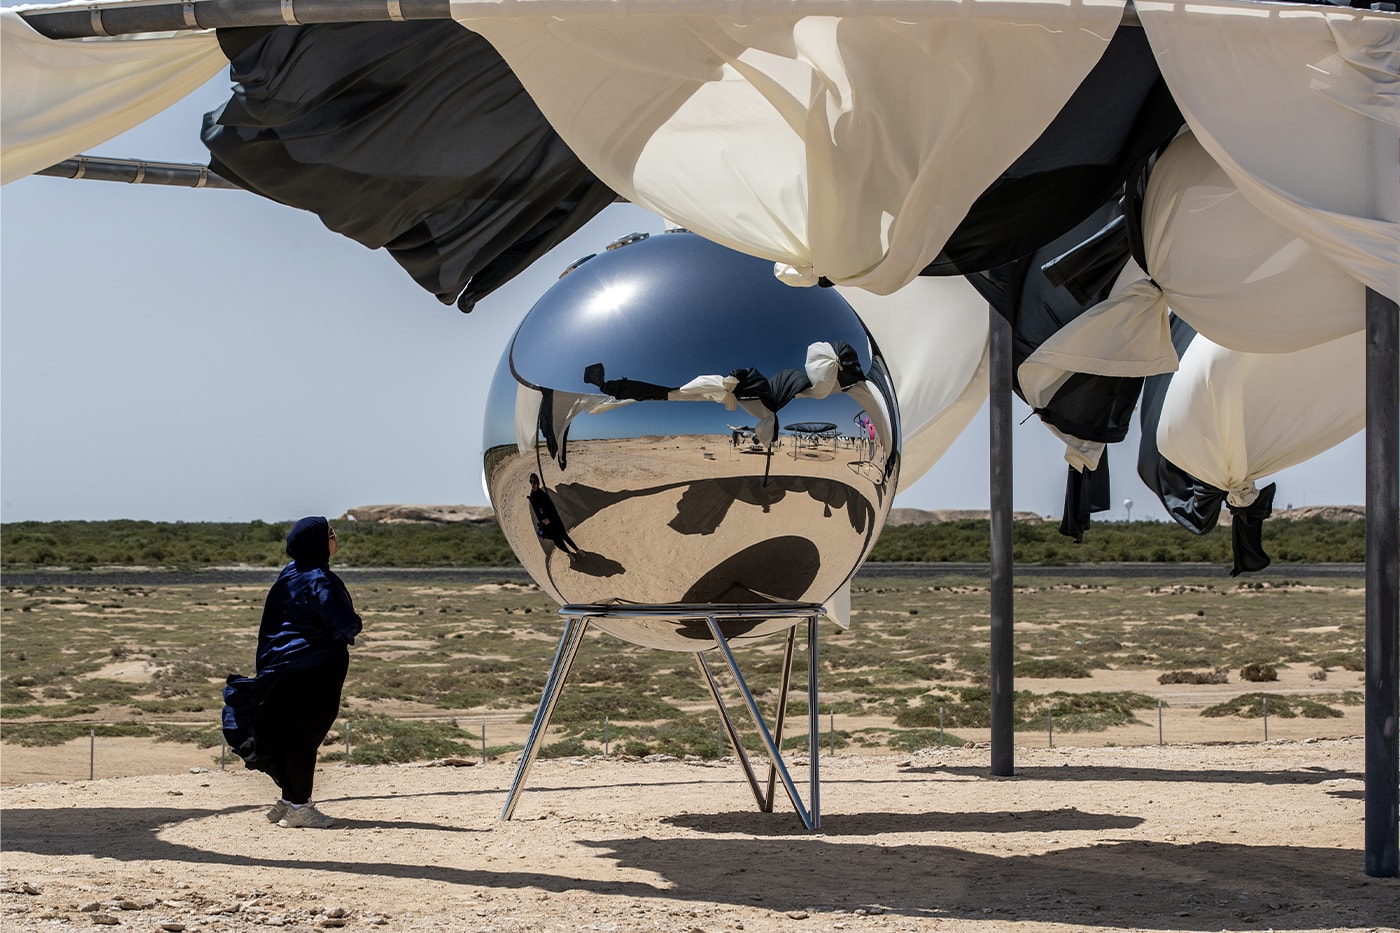 olafur eliasson the national museum of qatar the curious desert immersive outdoor art installation